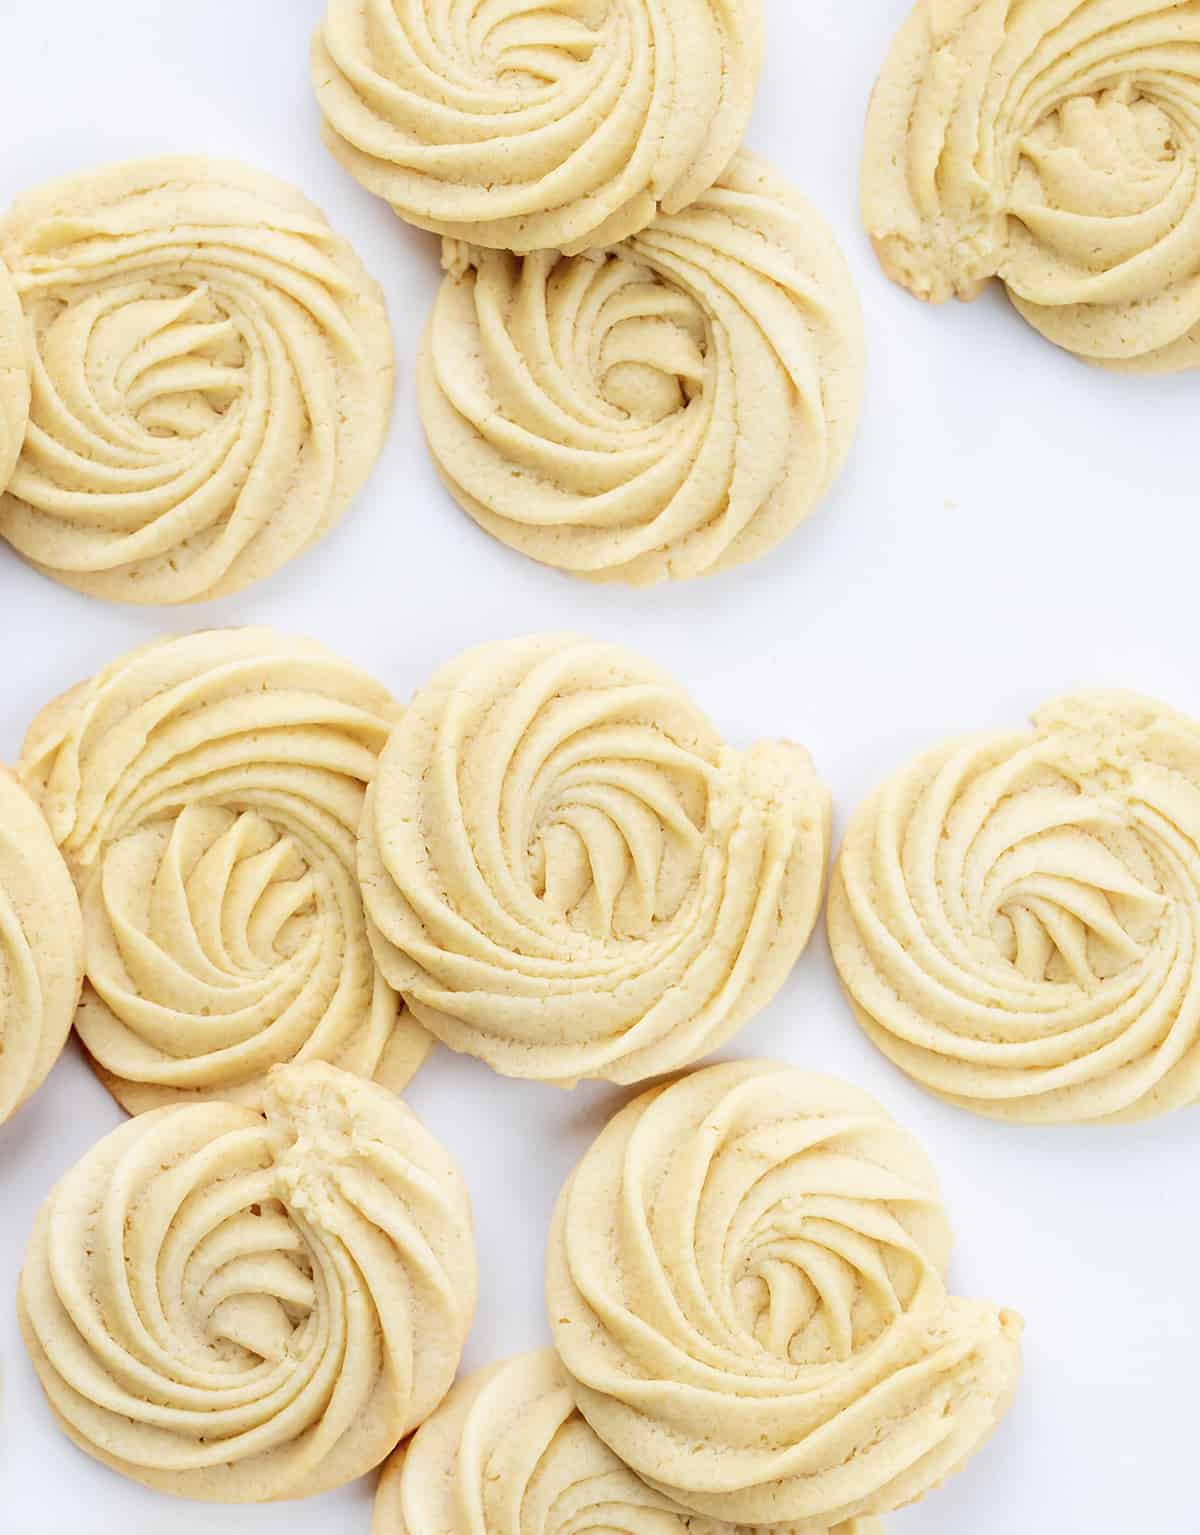 Many Butter Cookies on a White Counter.